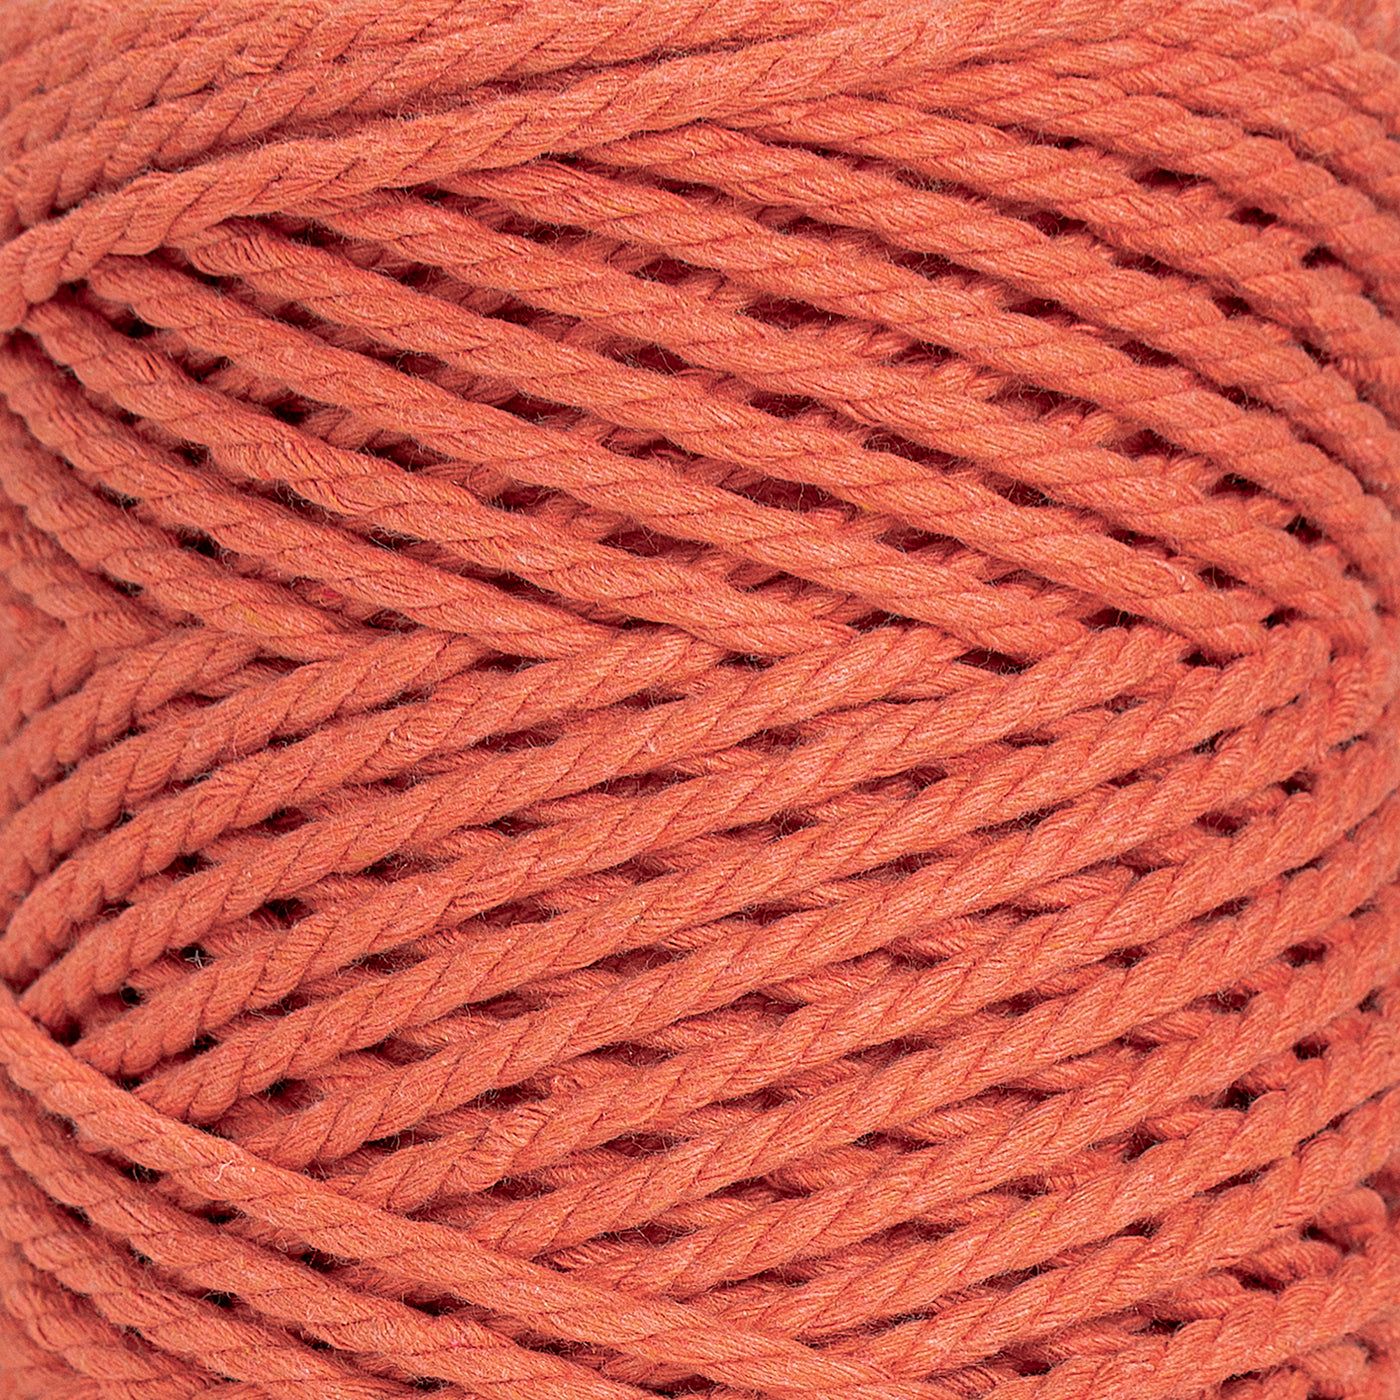 COTTON ROPE ZERO WASTE 3 MM - 3 PLY - SUNSET COLOR